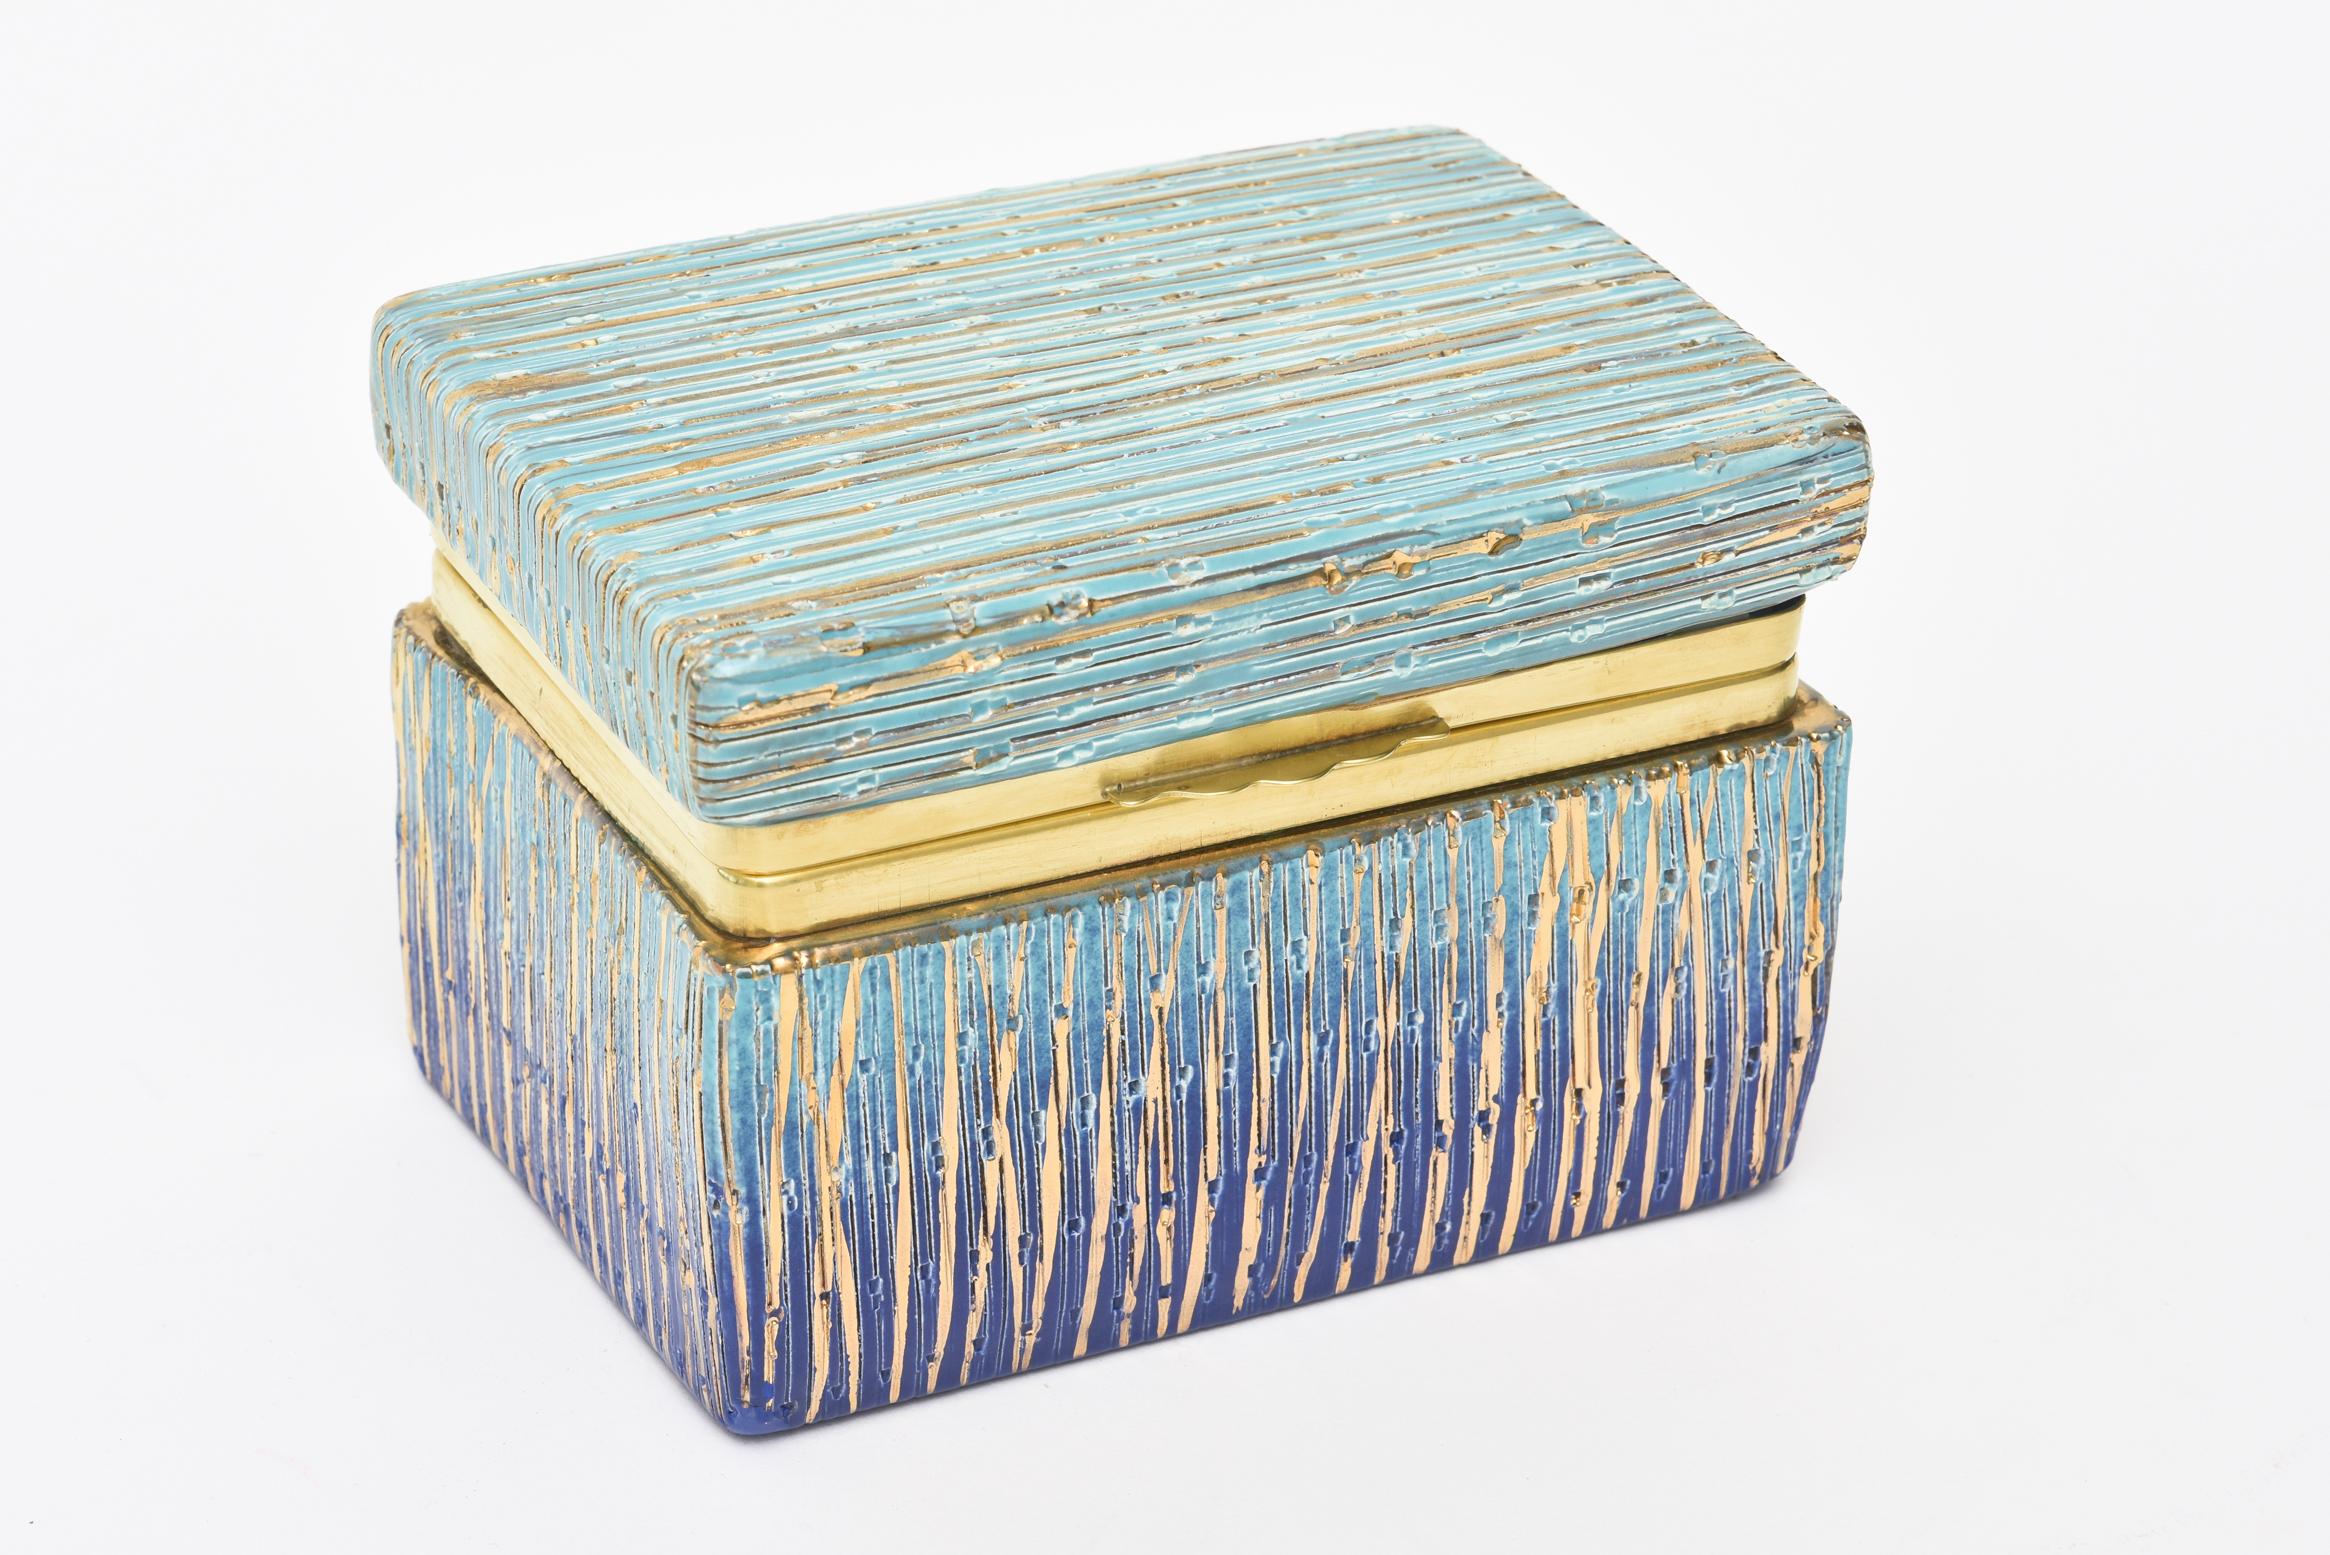 This stunning and well executed Italian Mid-Century Modern Aldo Londi for Bistossi glazed ceramic hinged box with brass rim is a real beauty. it is from the 1960s.
It has textural and dimensional lines in the glazed ceramic with painted gold. The